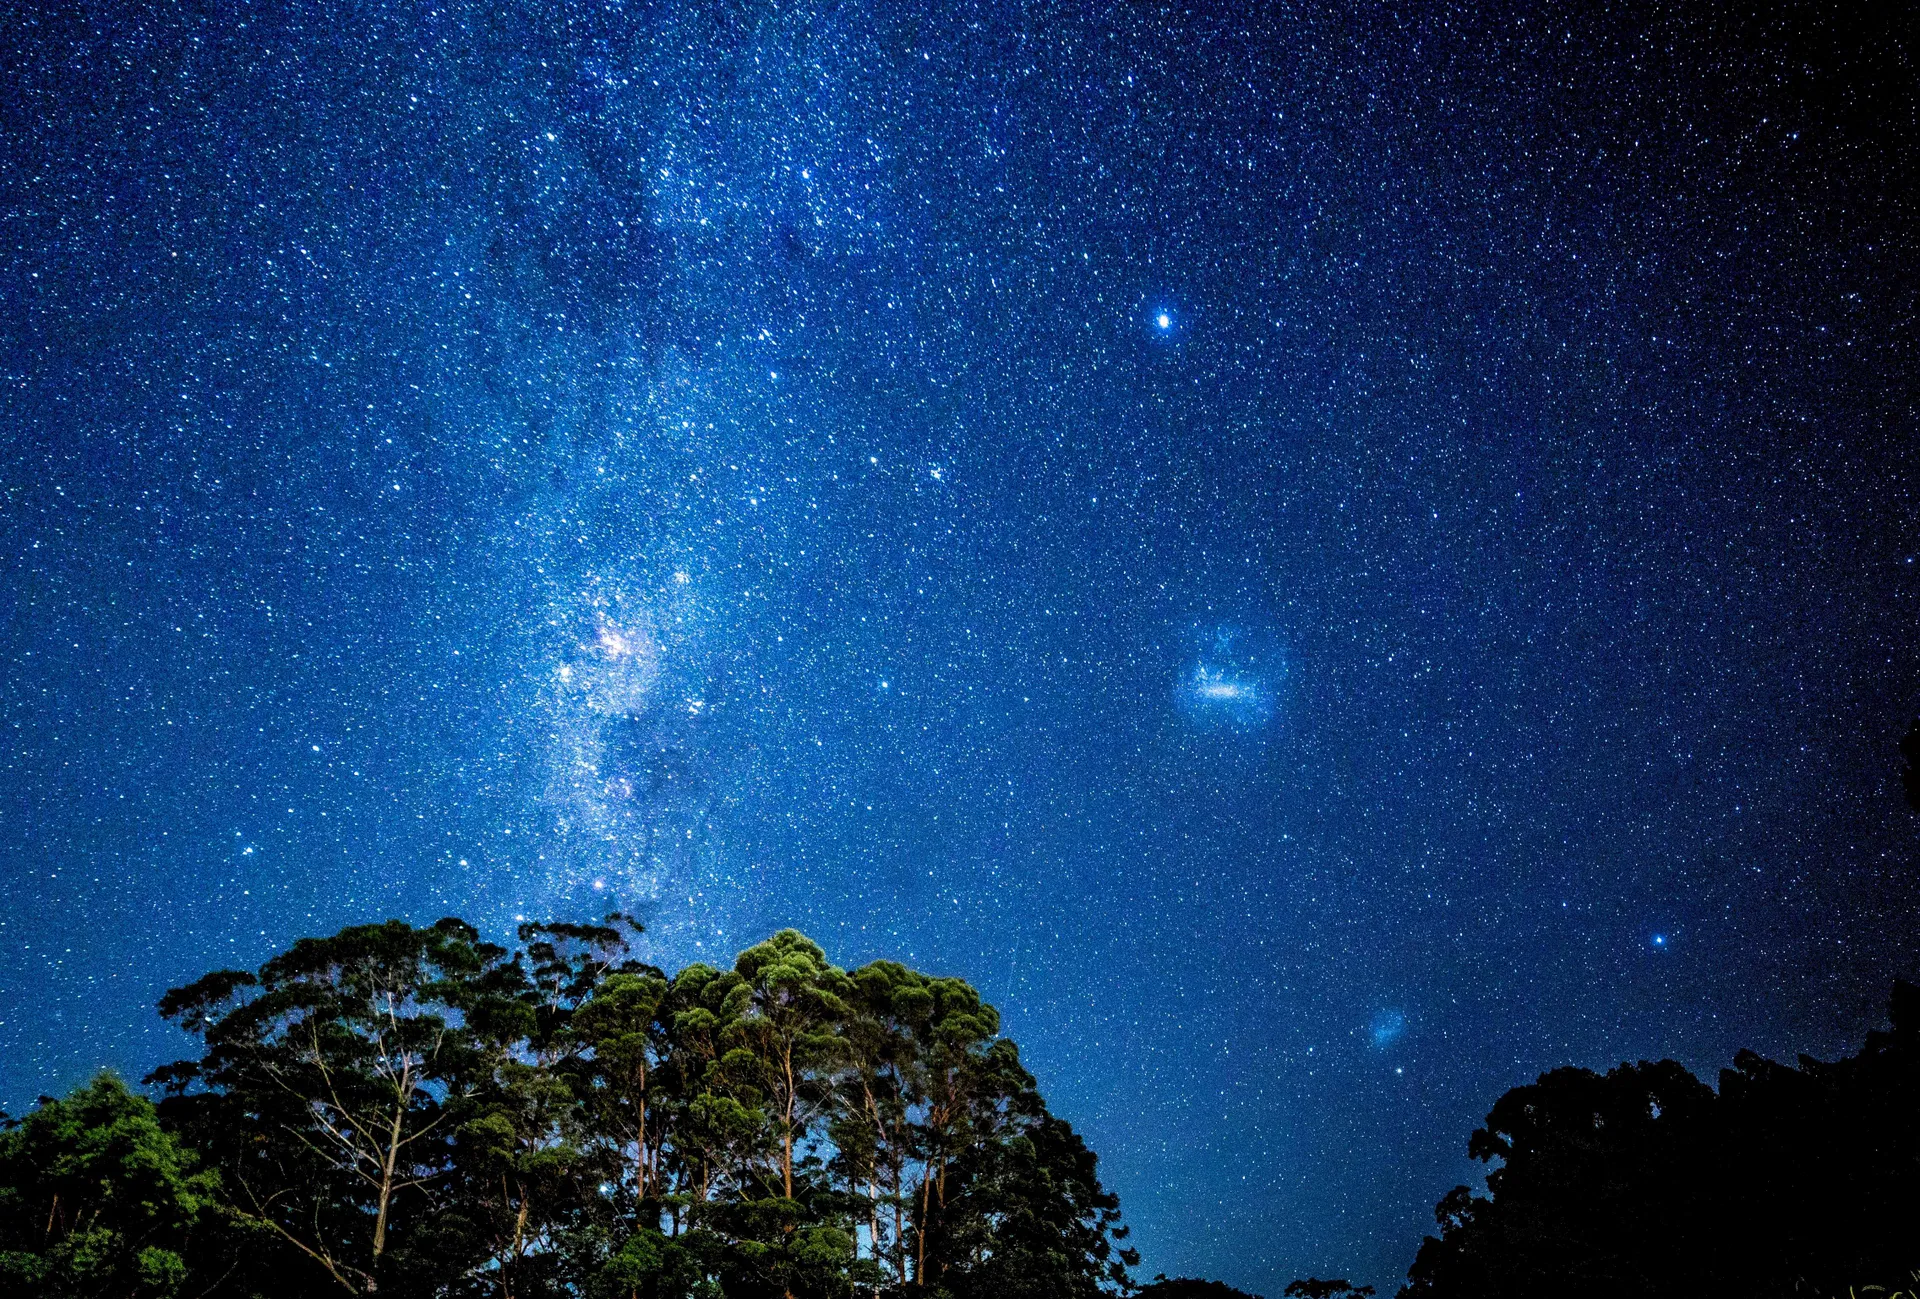 The night sky over the proposed Dark Sky Reserve area. Image credit Dr Ken Wishaw and Geoff Simon